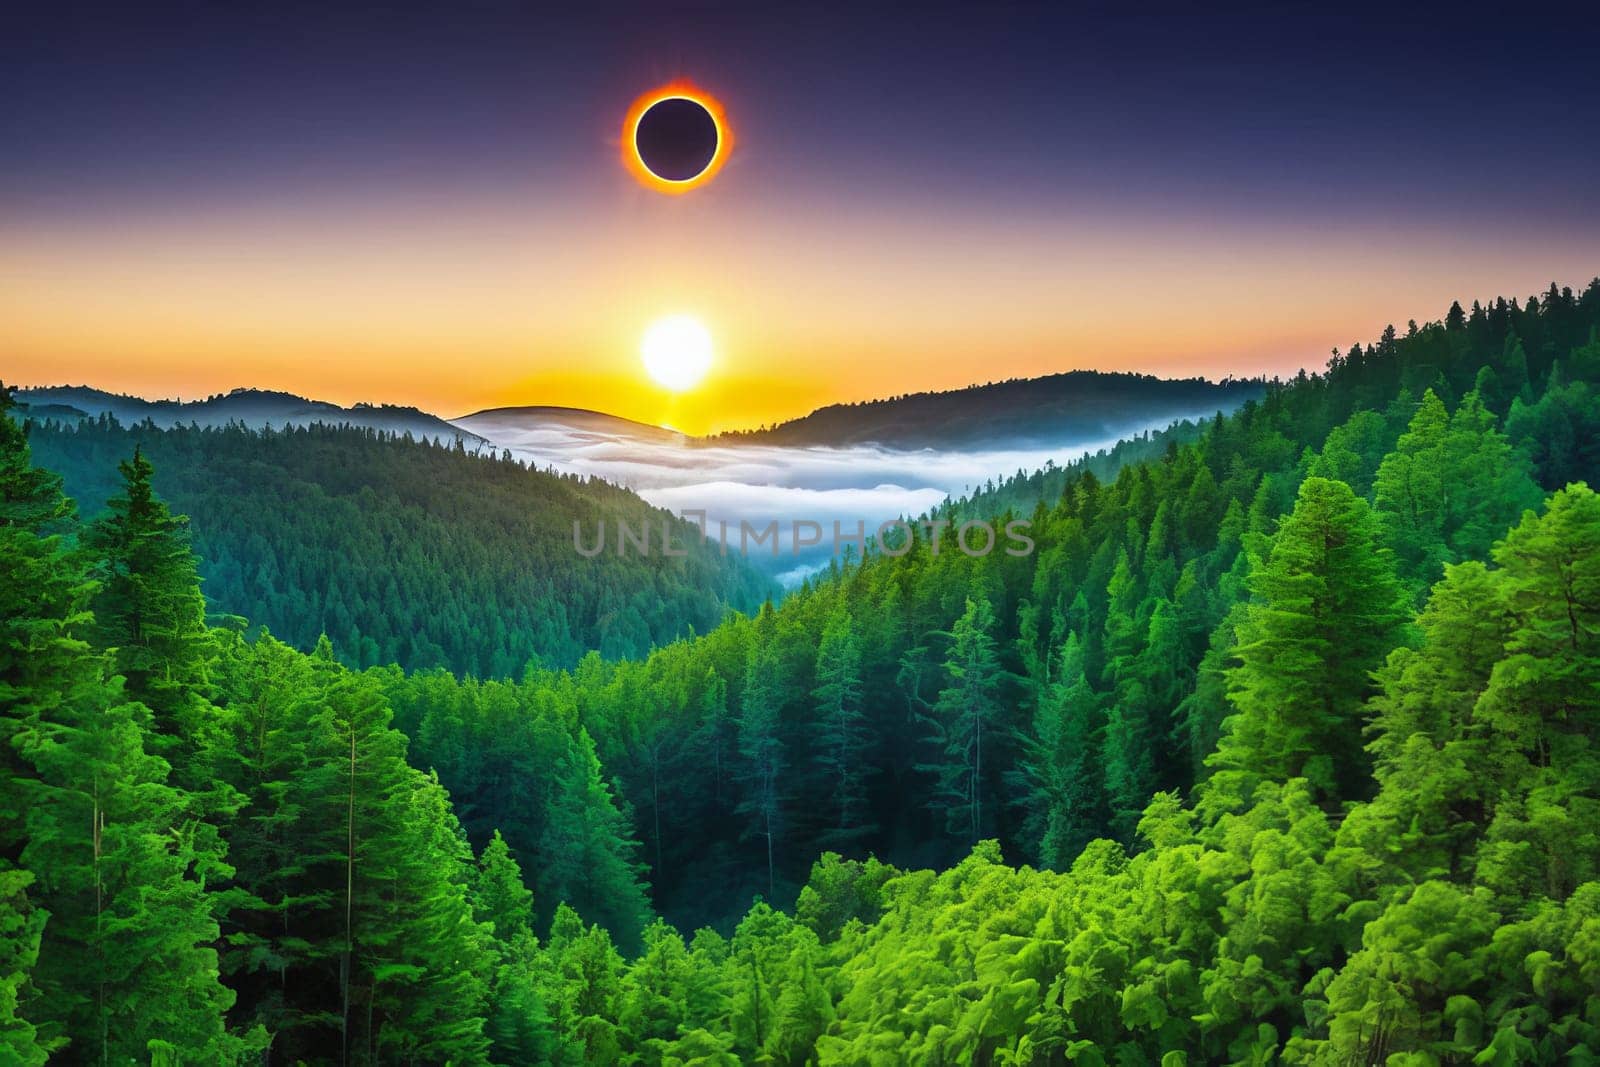 The setting sun is partially obscured by the moon, casting a golden glow over the misty forest below. The sky is deep blue, the suns rays are tinged with orange and yellow, creating a serene scene.